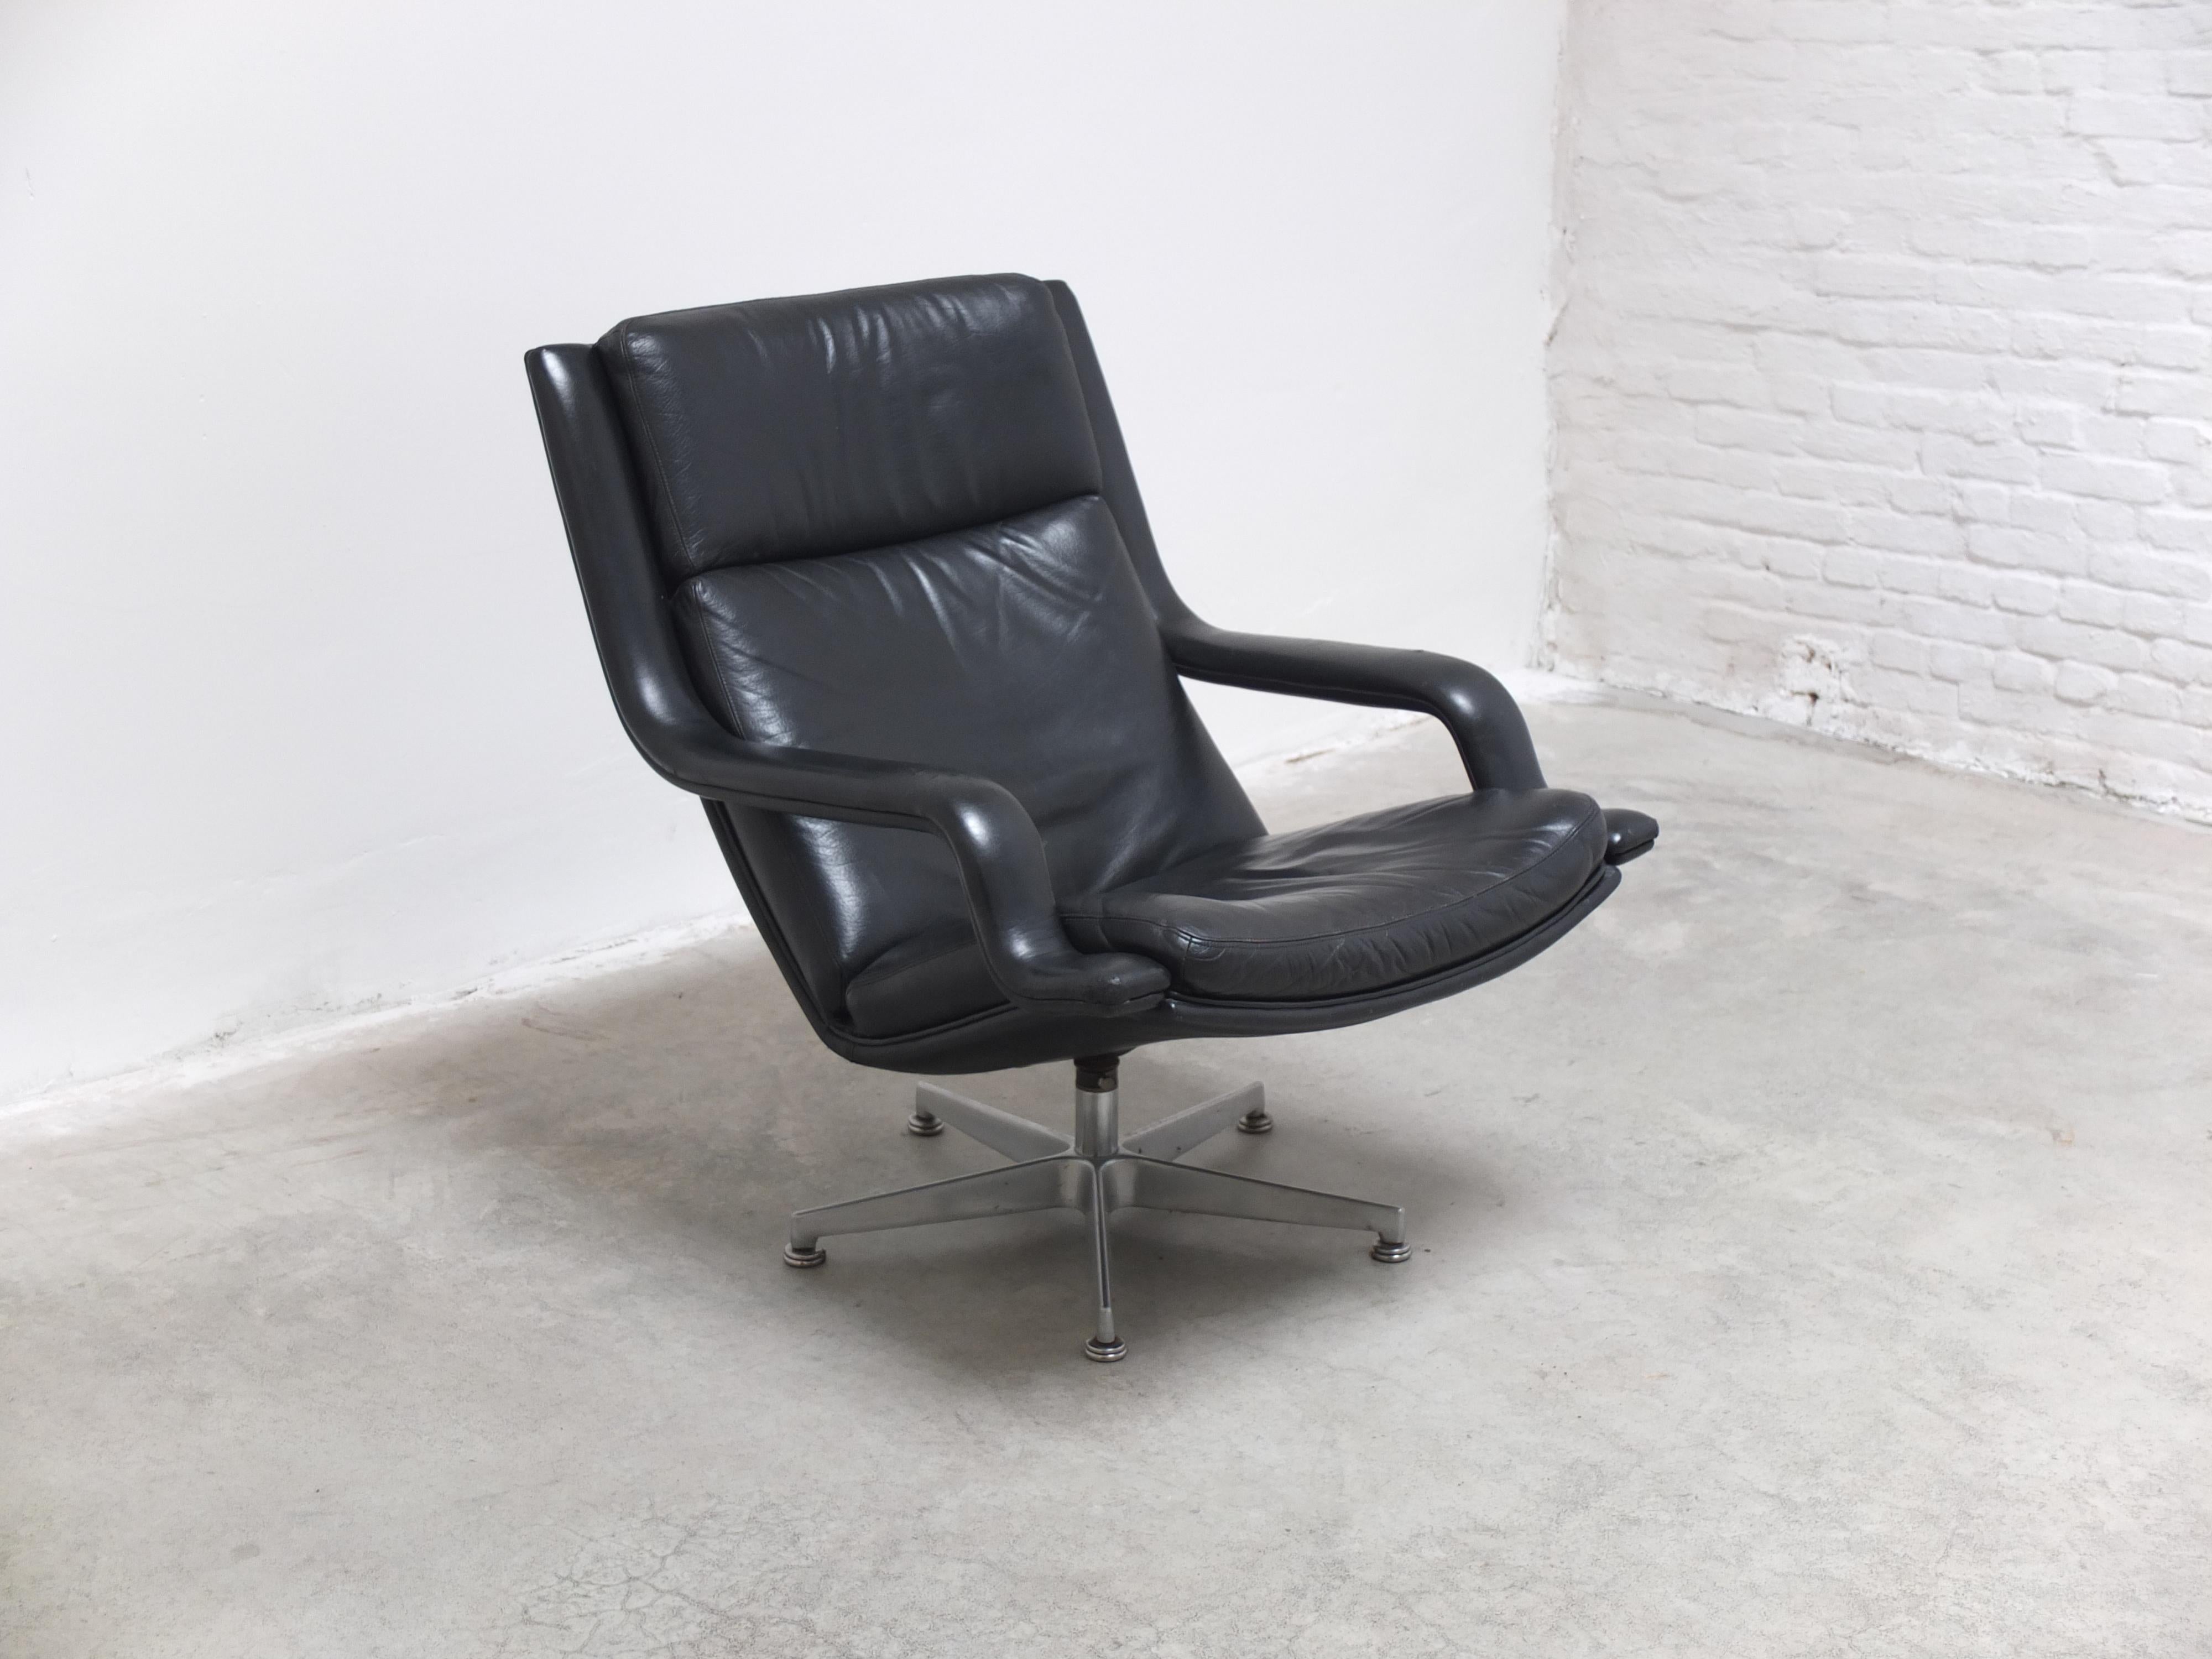 Leather 'F152' Swivel Lounge Chairs by Geoffrey Harcourt for Artifort, 1970s For Sale 7